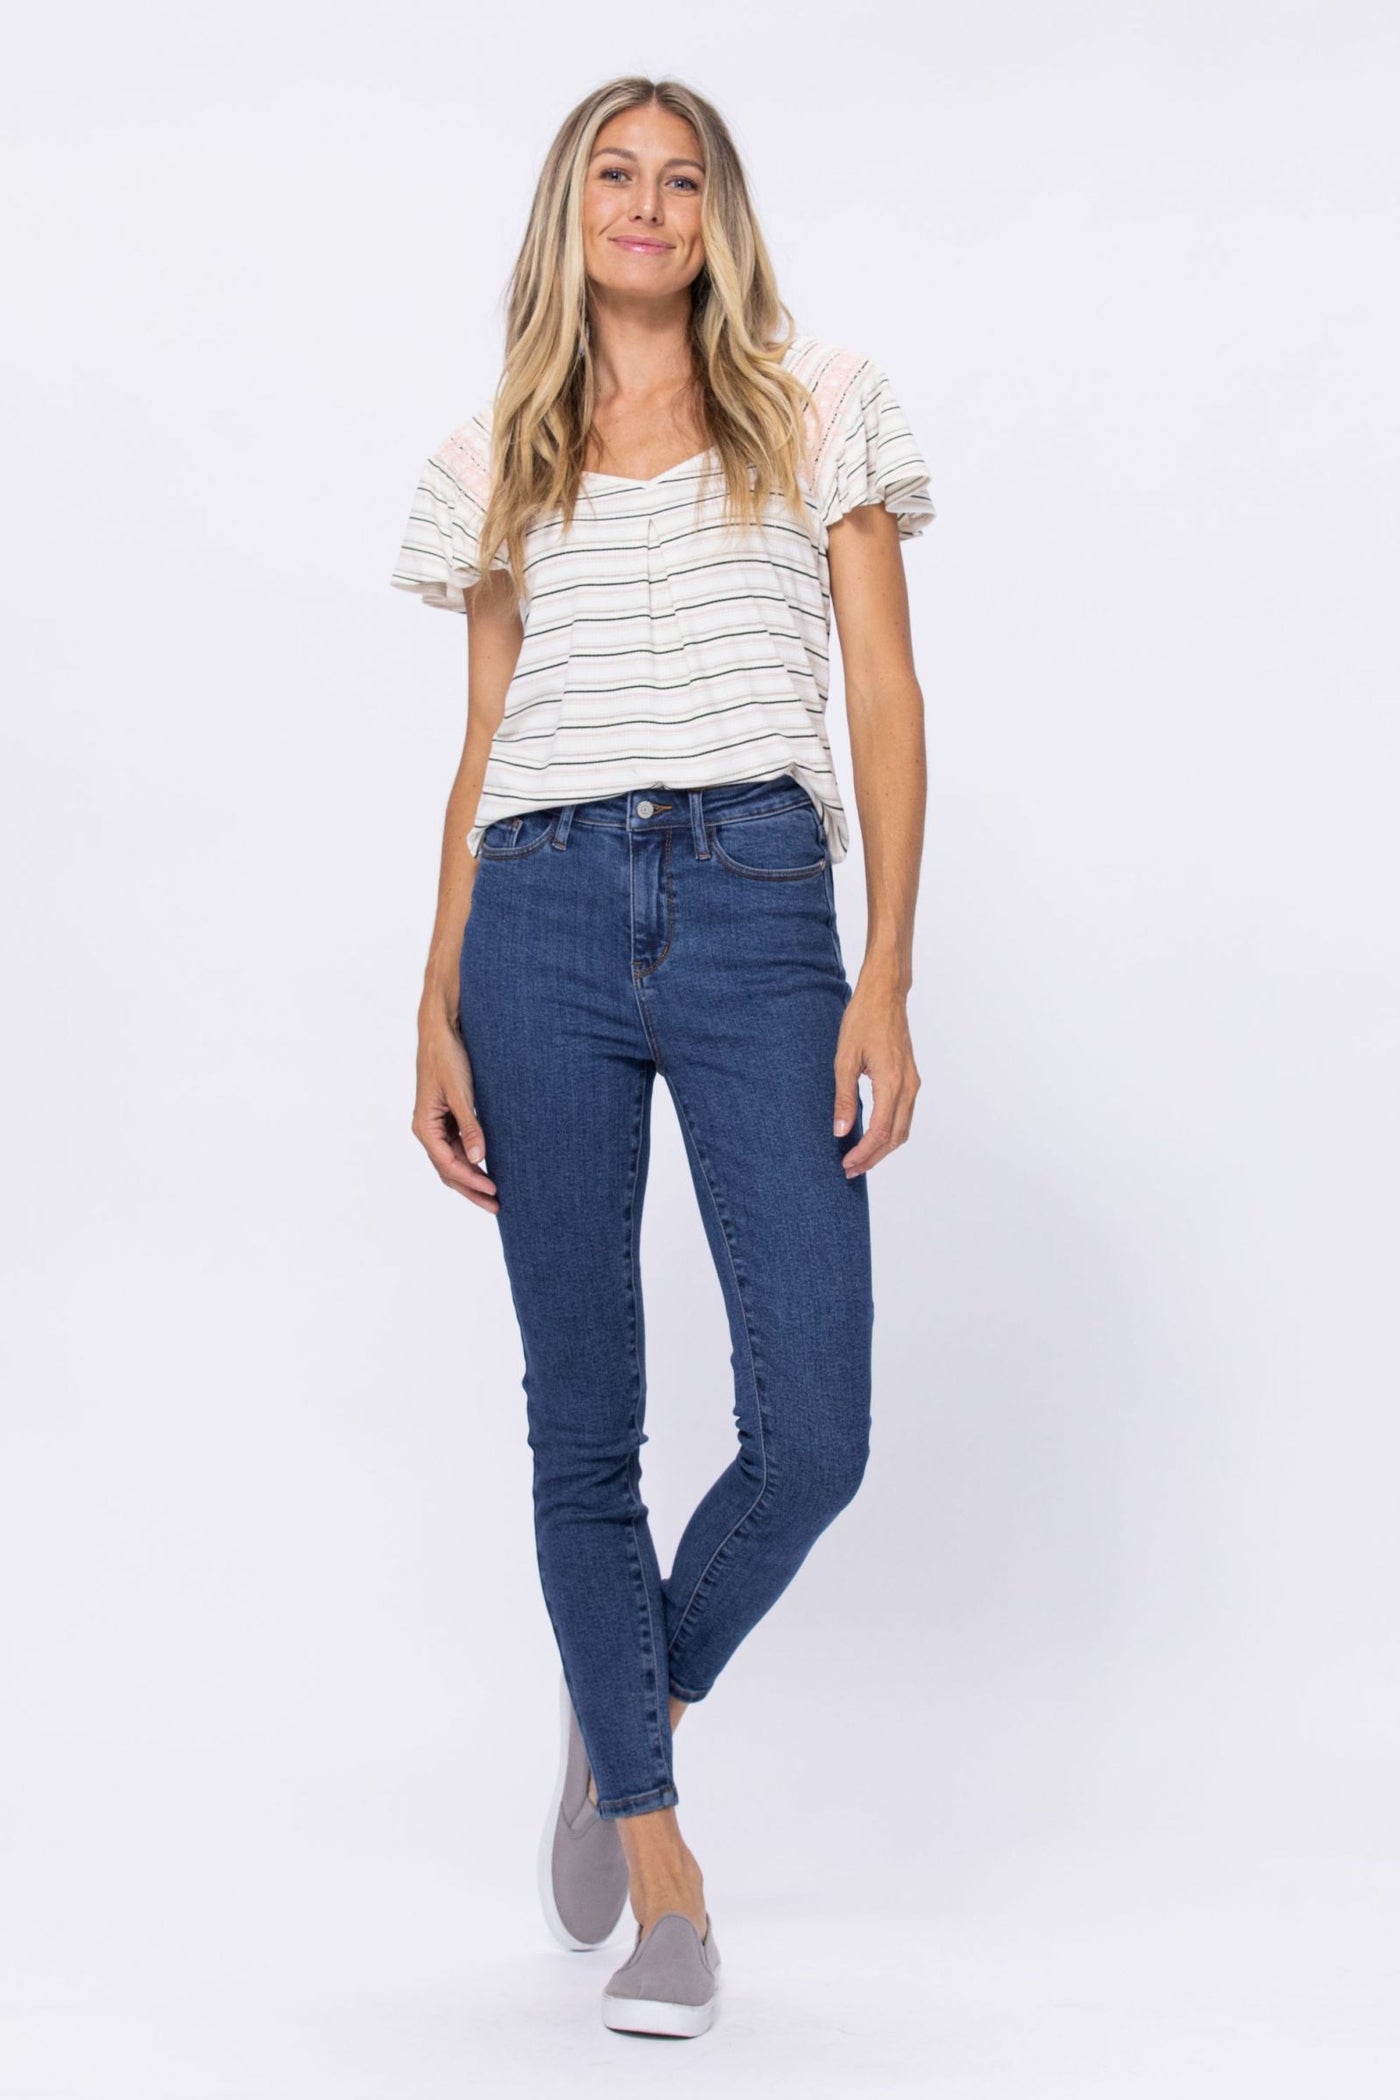 Judy Blue High Rise Stone Wash Skinny - Corinne Boutique Family Owned and Operated USA